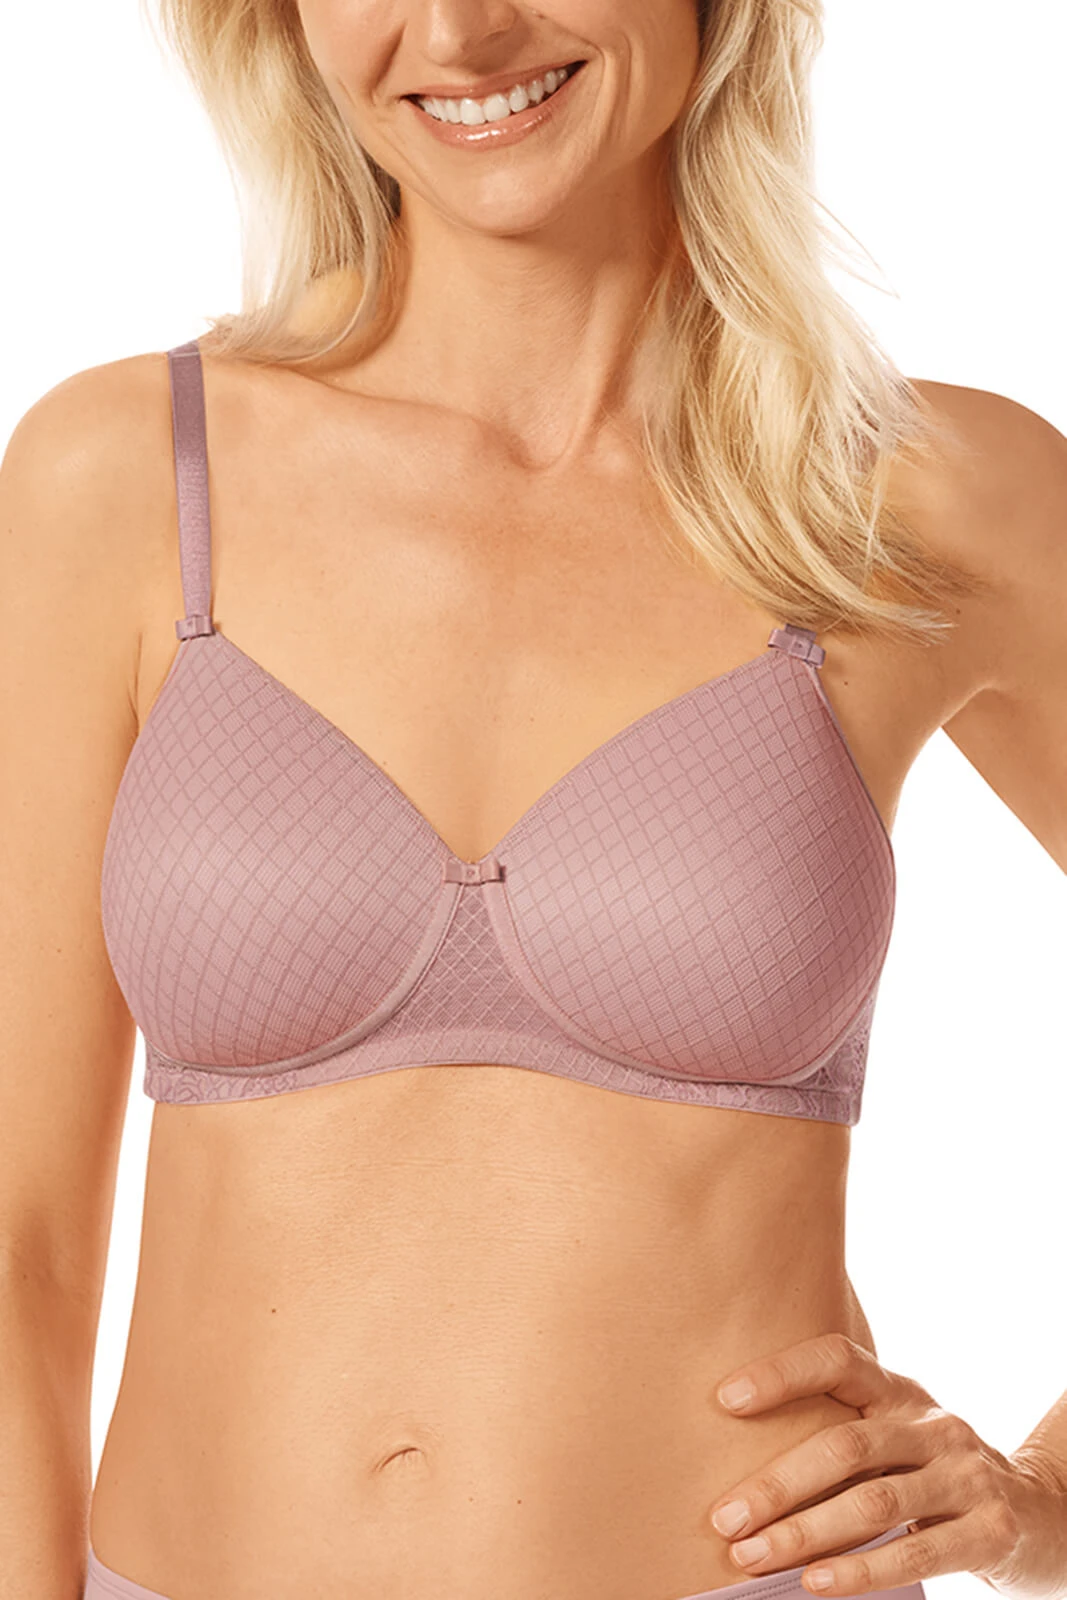 Padded Under Wired Push Up Bra with Net Coverage (Light Violet)-34B